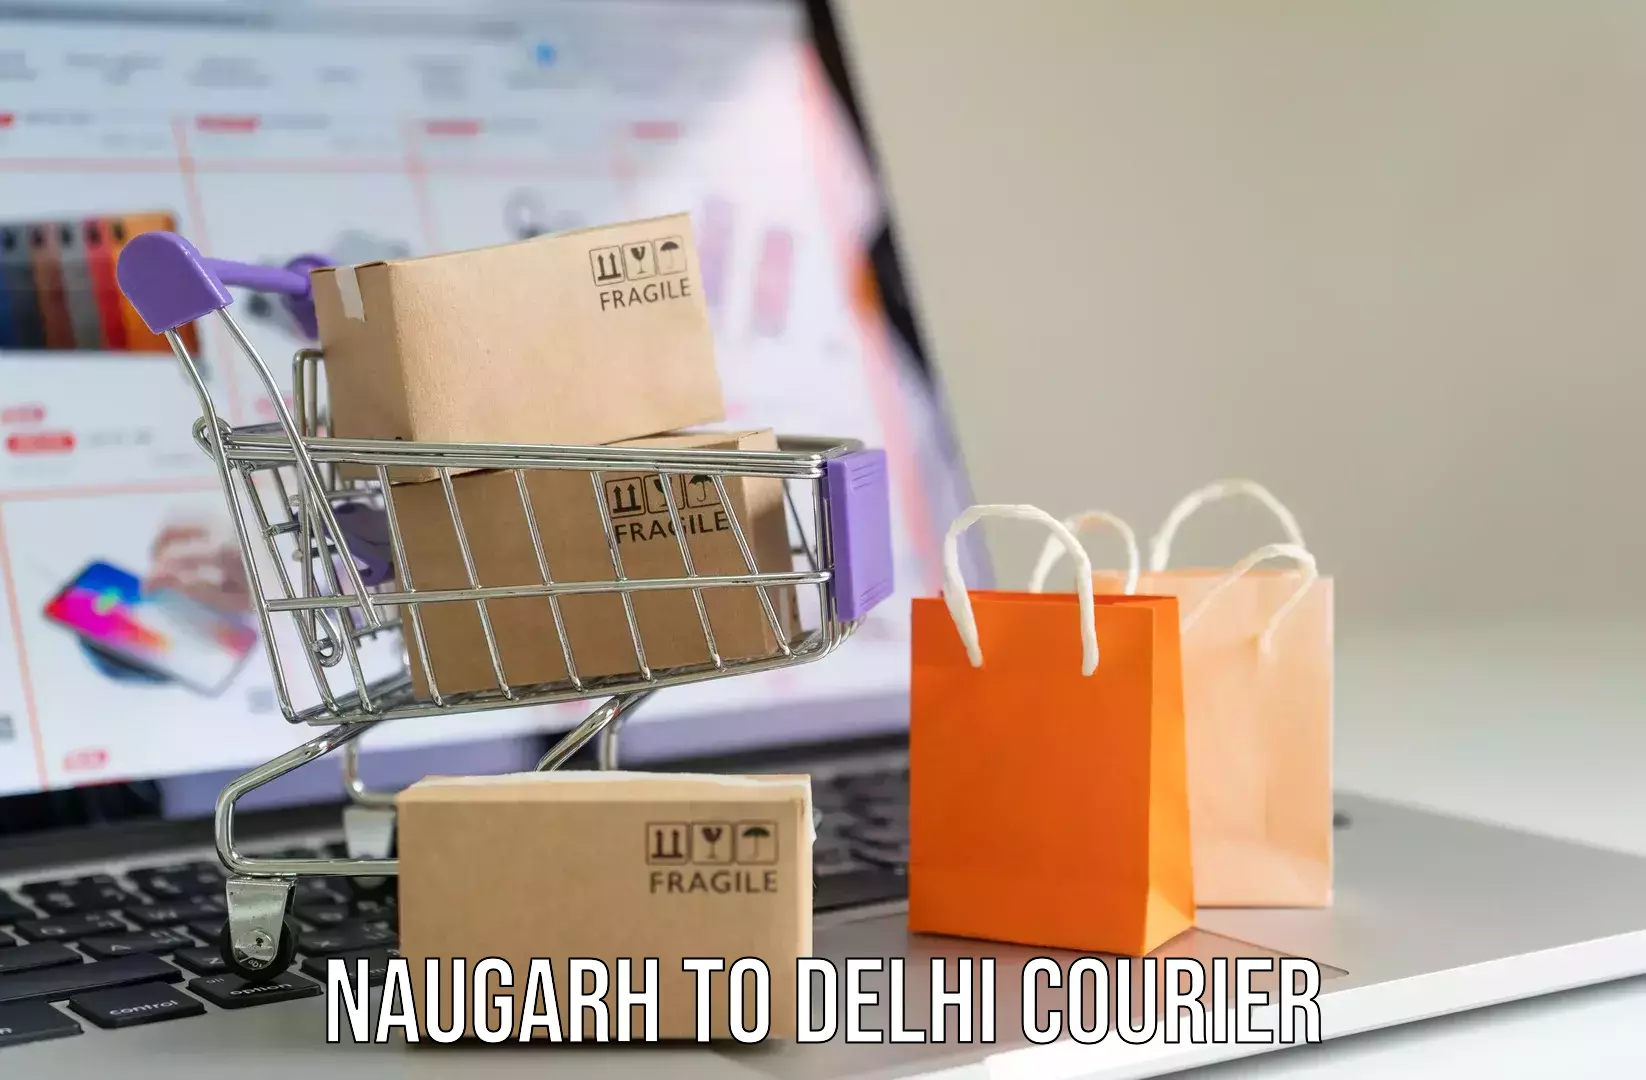 Express luggage delivery Naugarh to Delhi